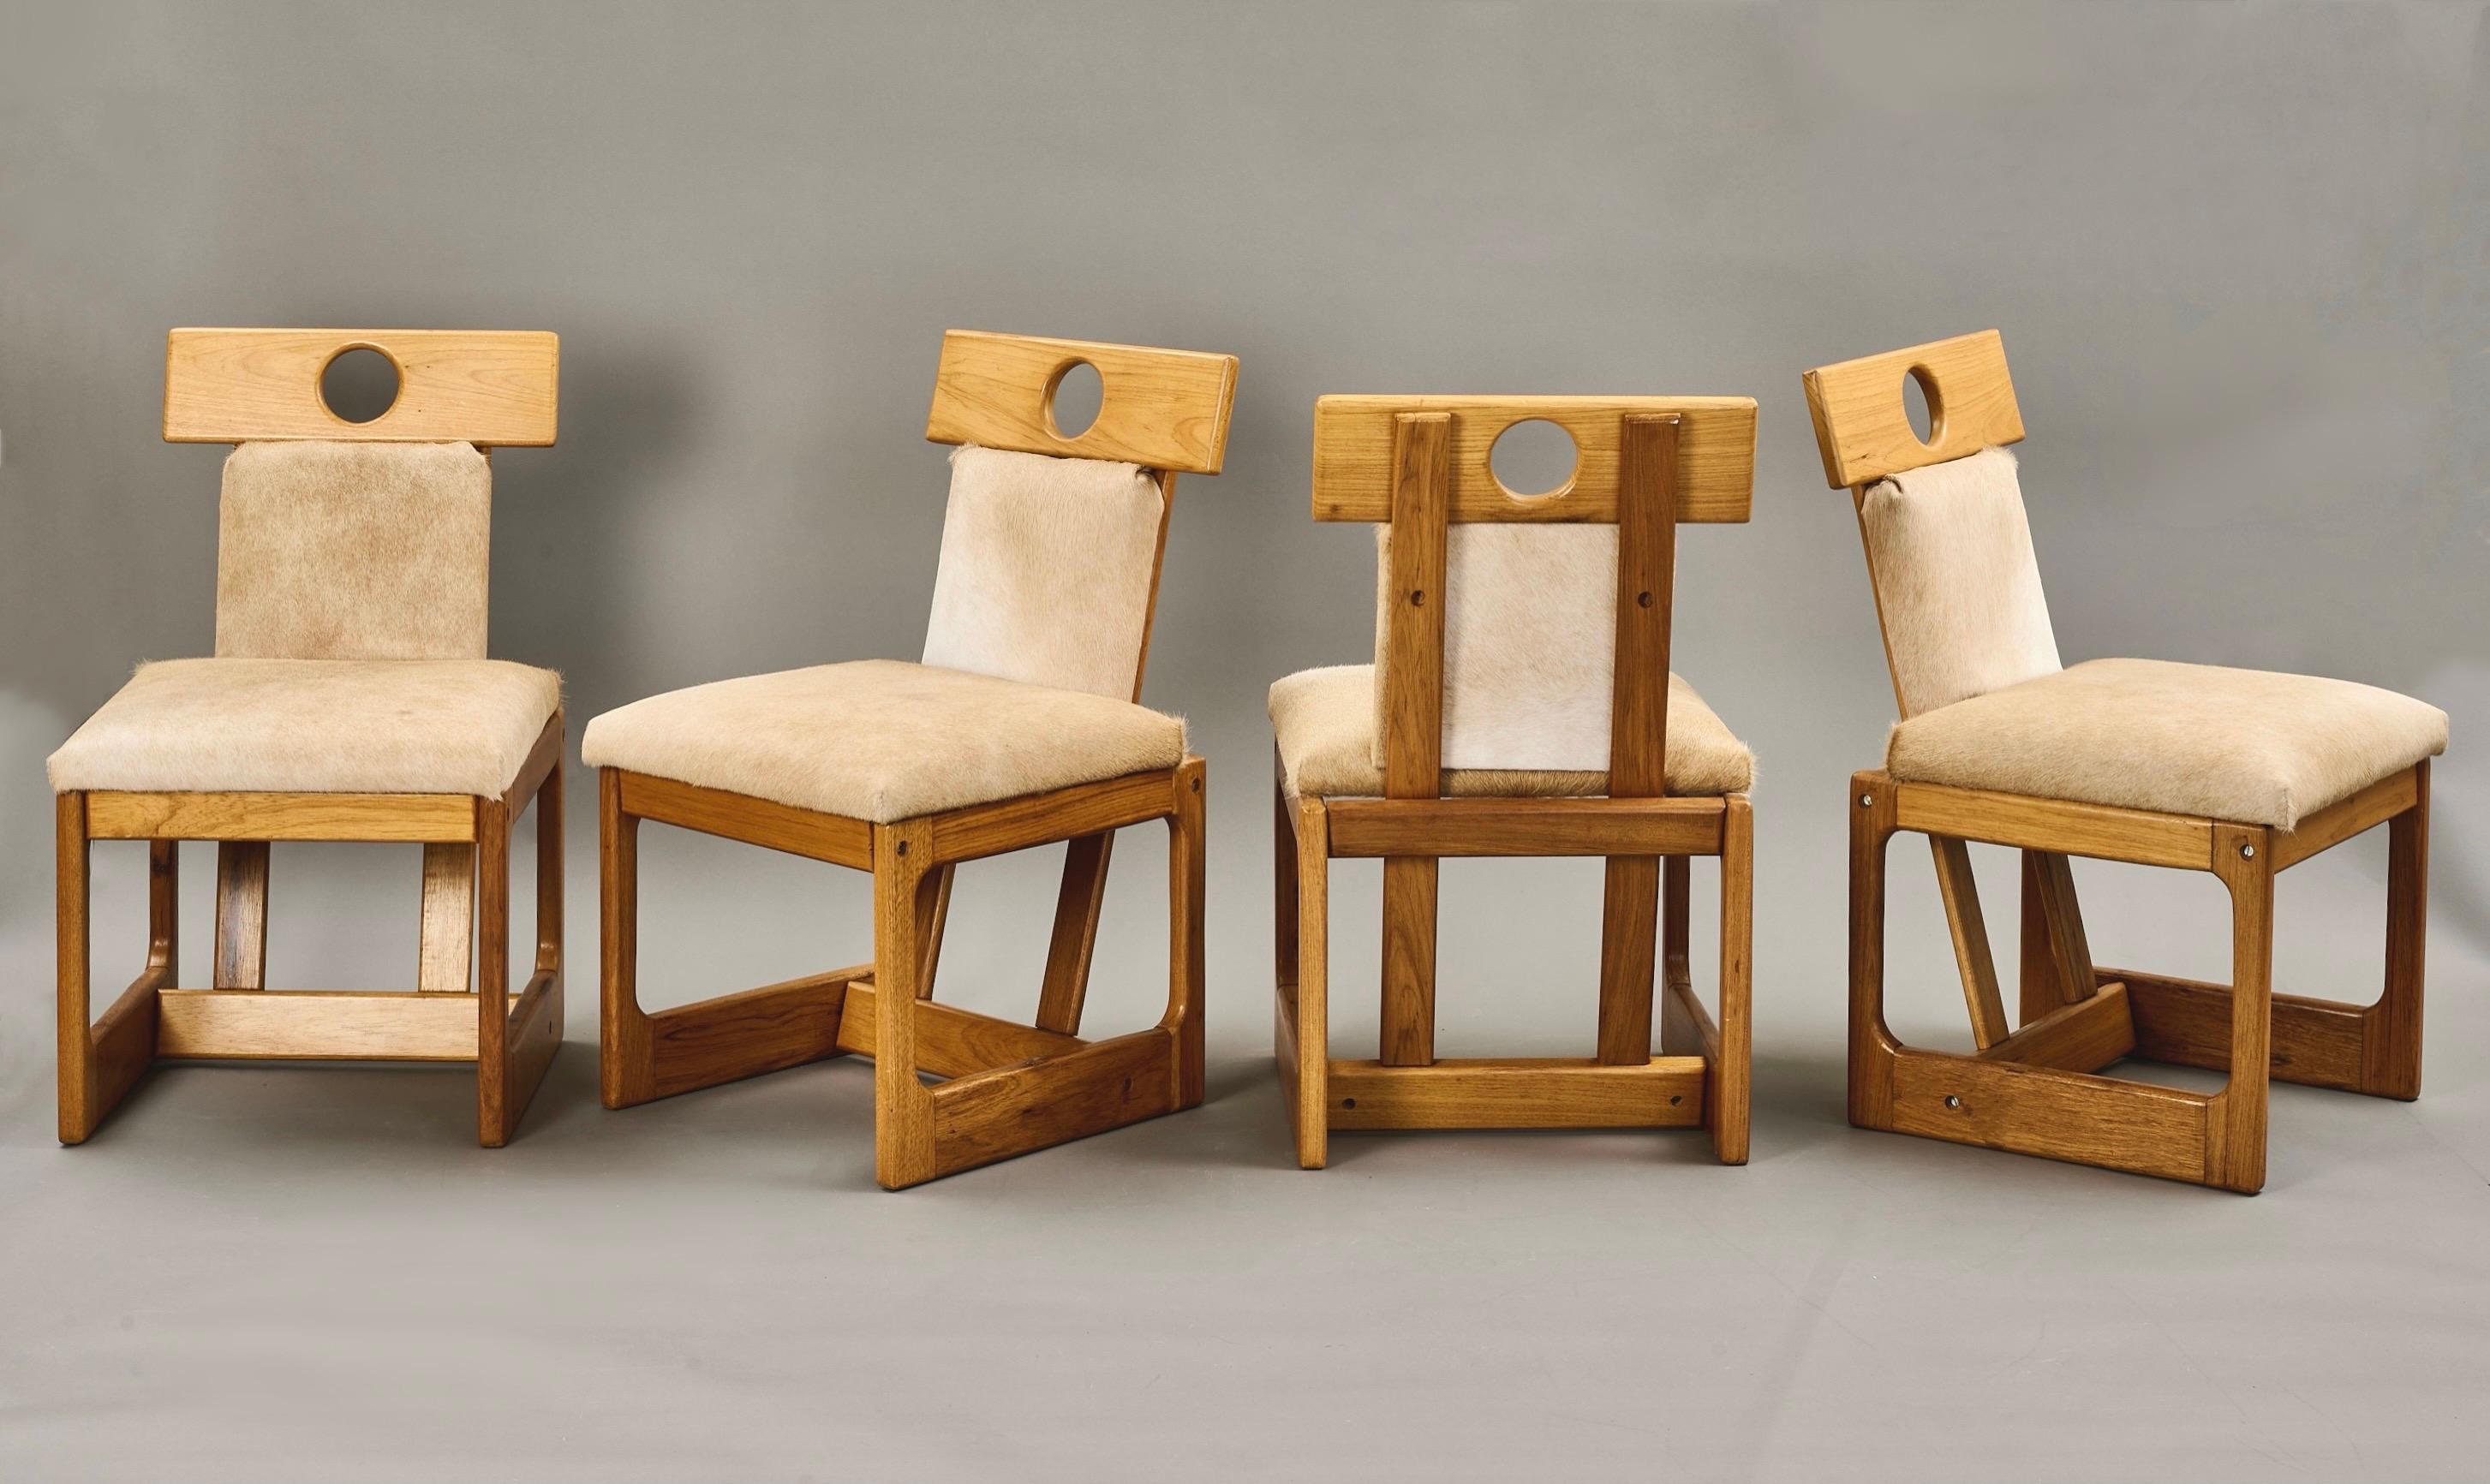 Mid-Century Modern Sergio Rodrigues: Set of 4 Cuiaba Dining Chairs in Caviona and Hide, Brazil 1985 For Sale